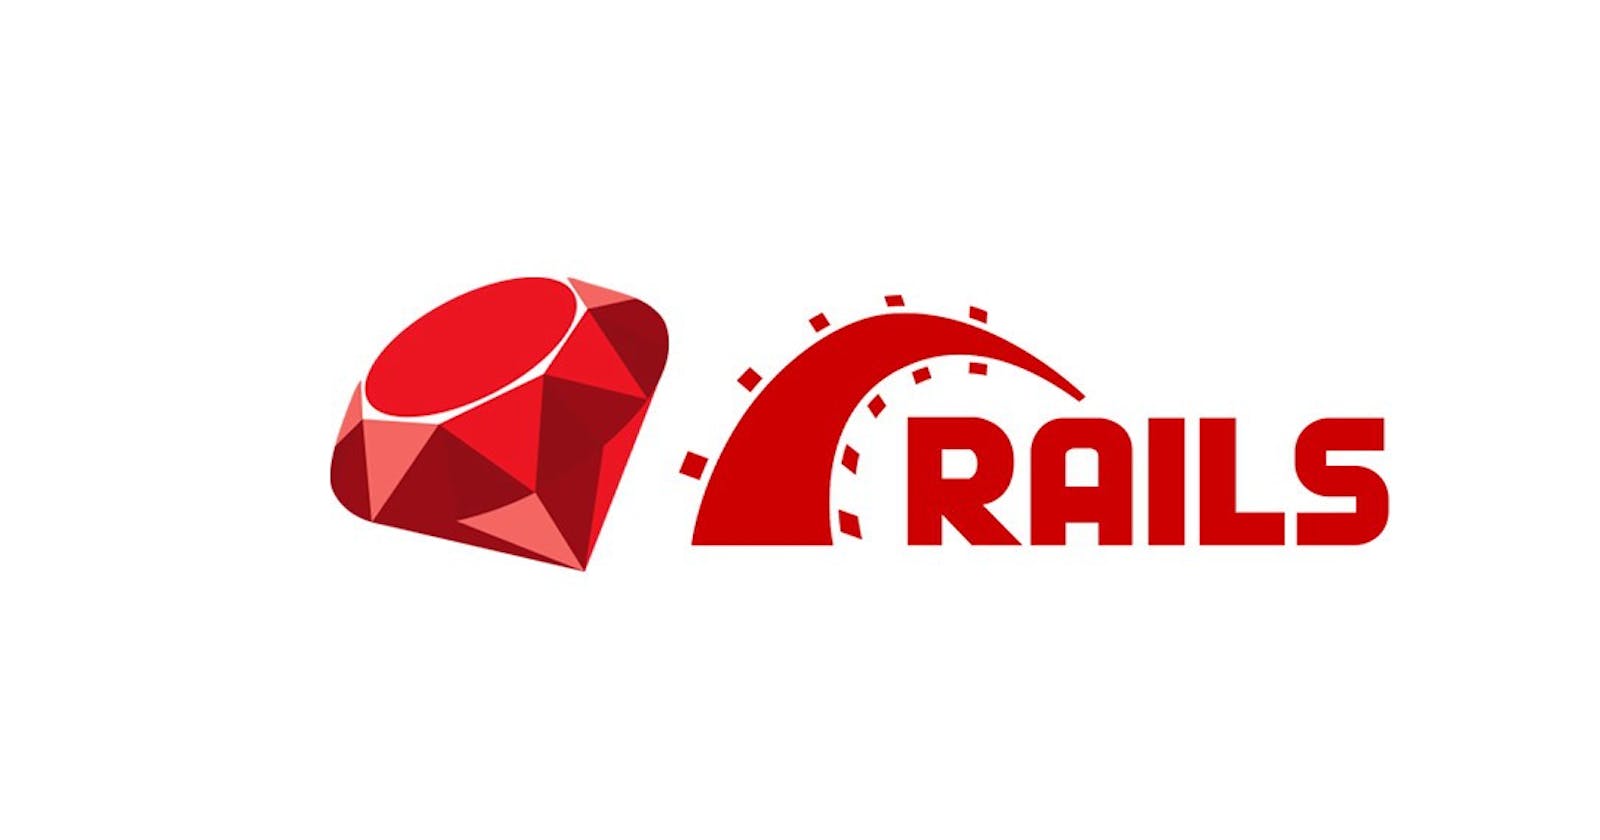 A quick peep on Ruby on Rails